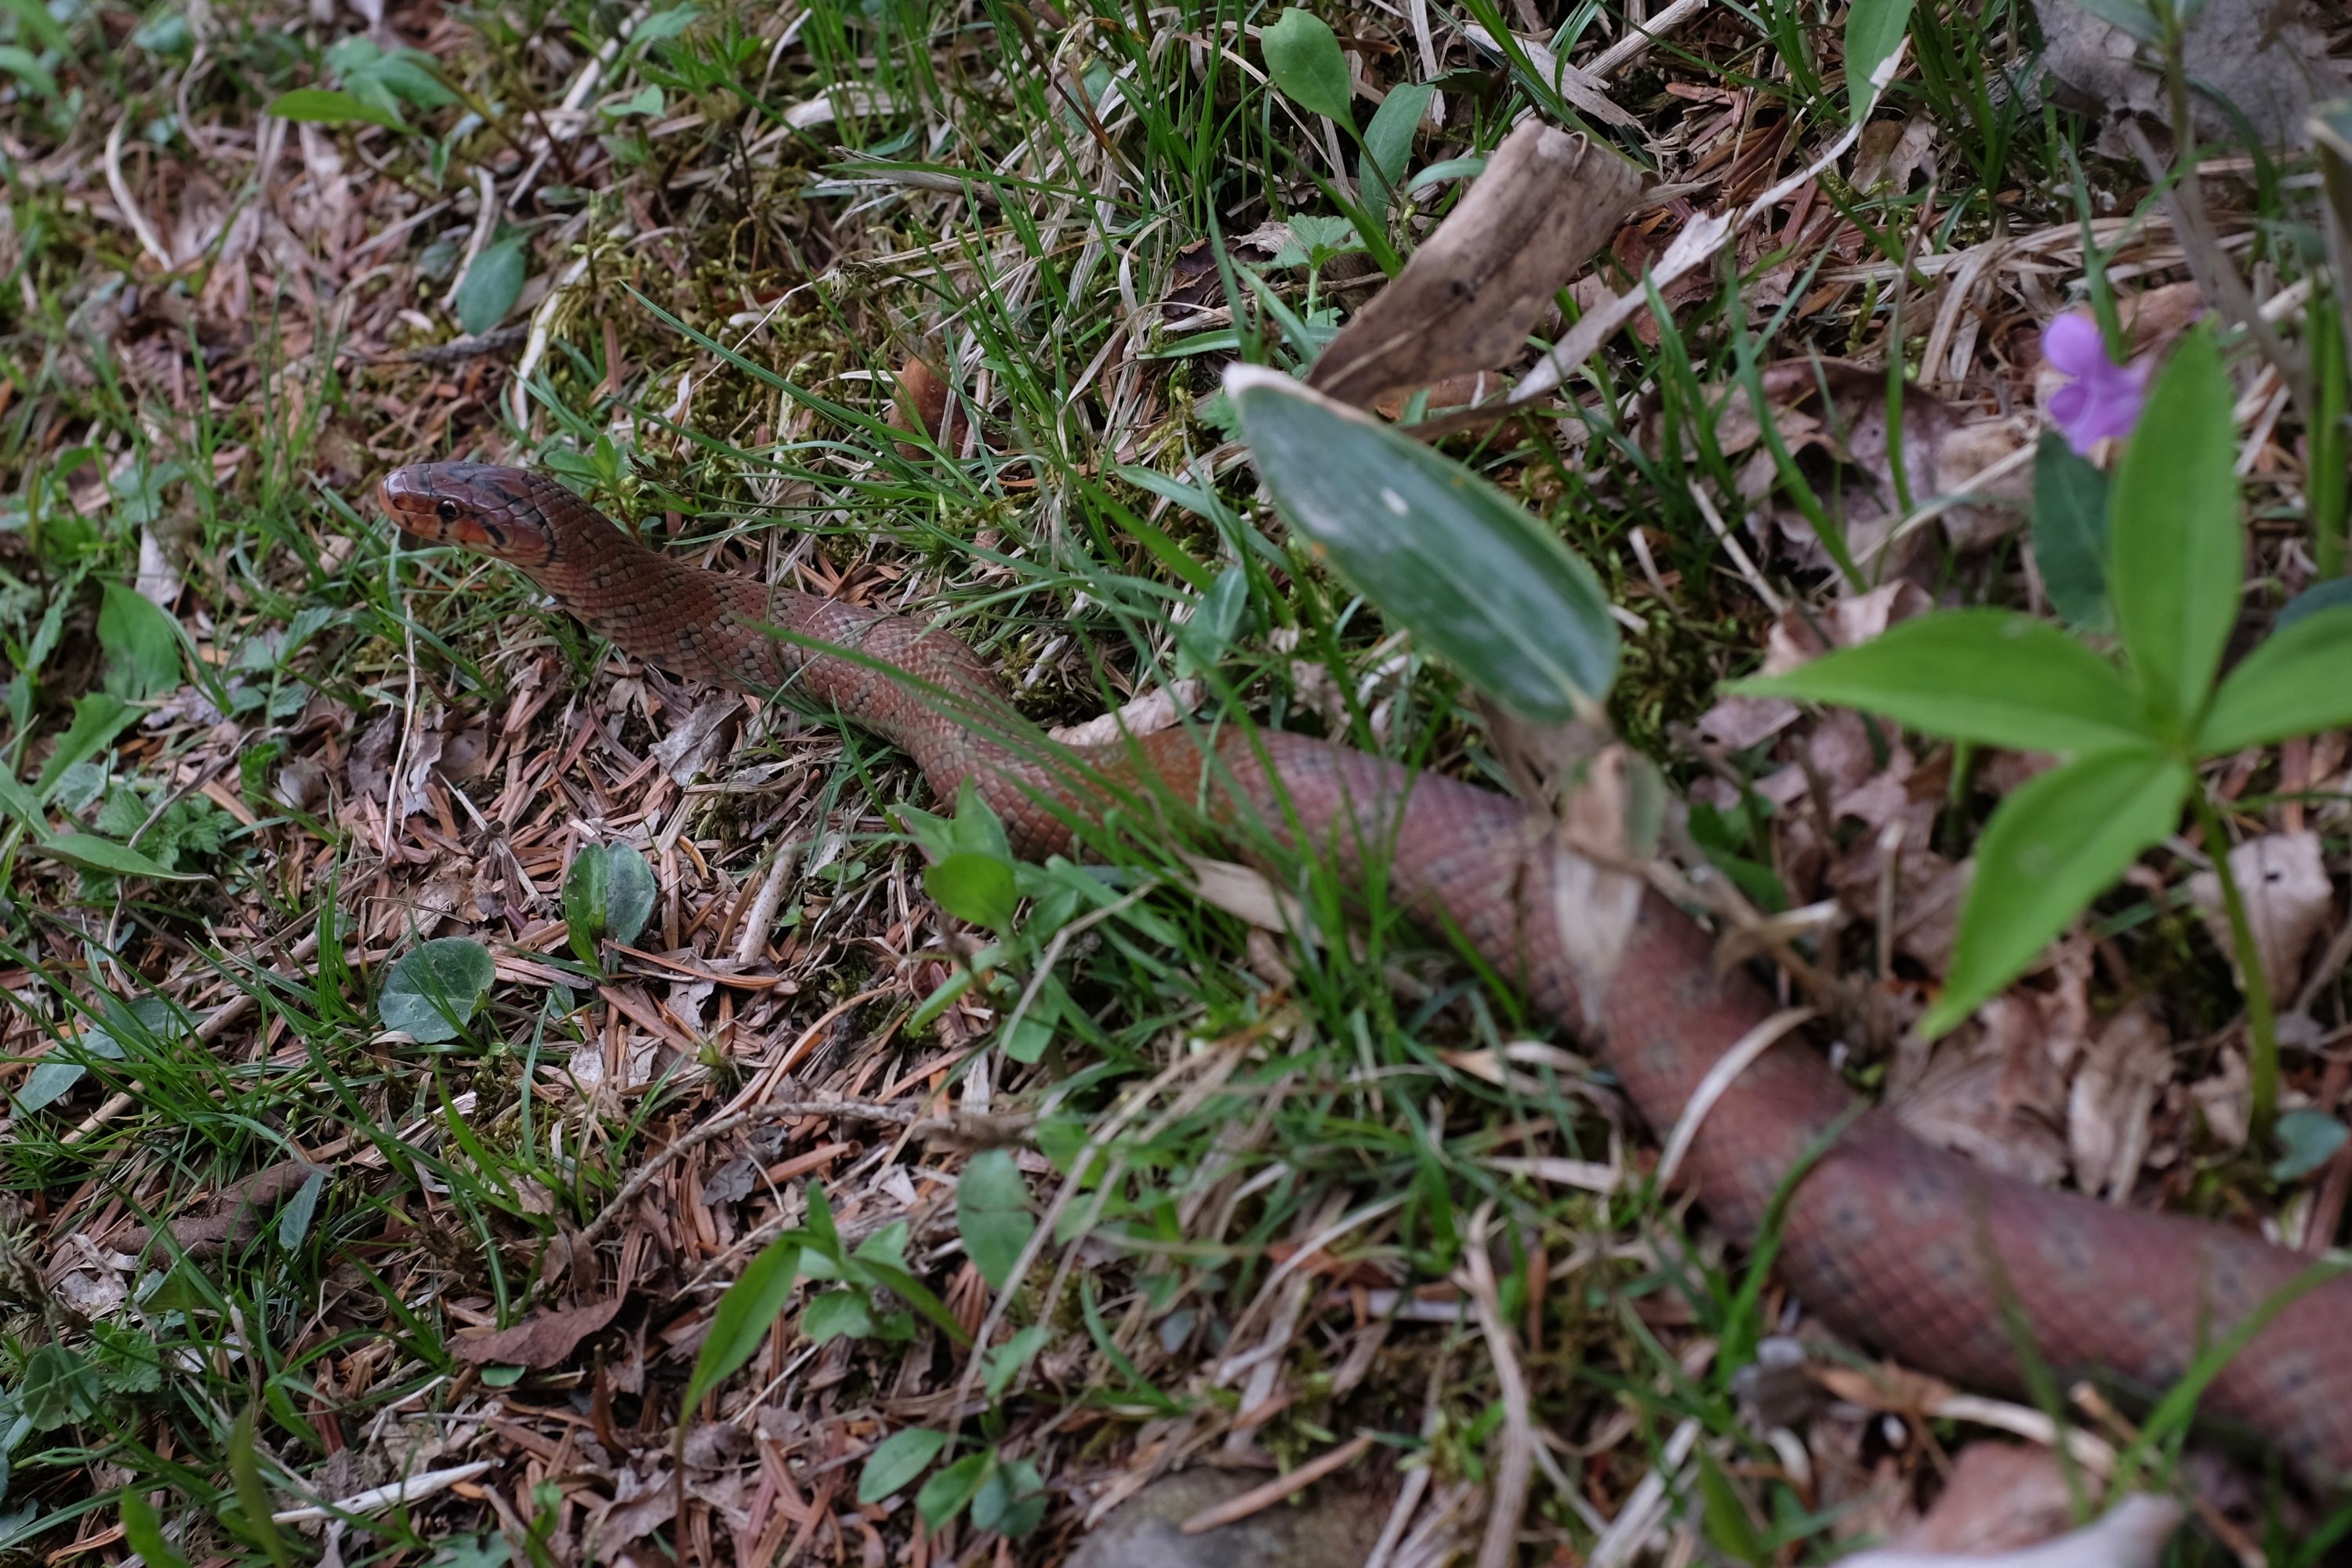 A snake, alert and looking into the camera, slithers across an undergrowth of bamboo grass and purple flowers.